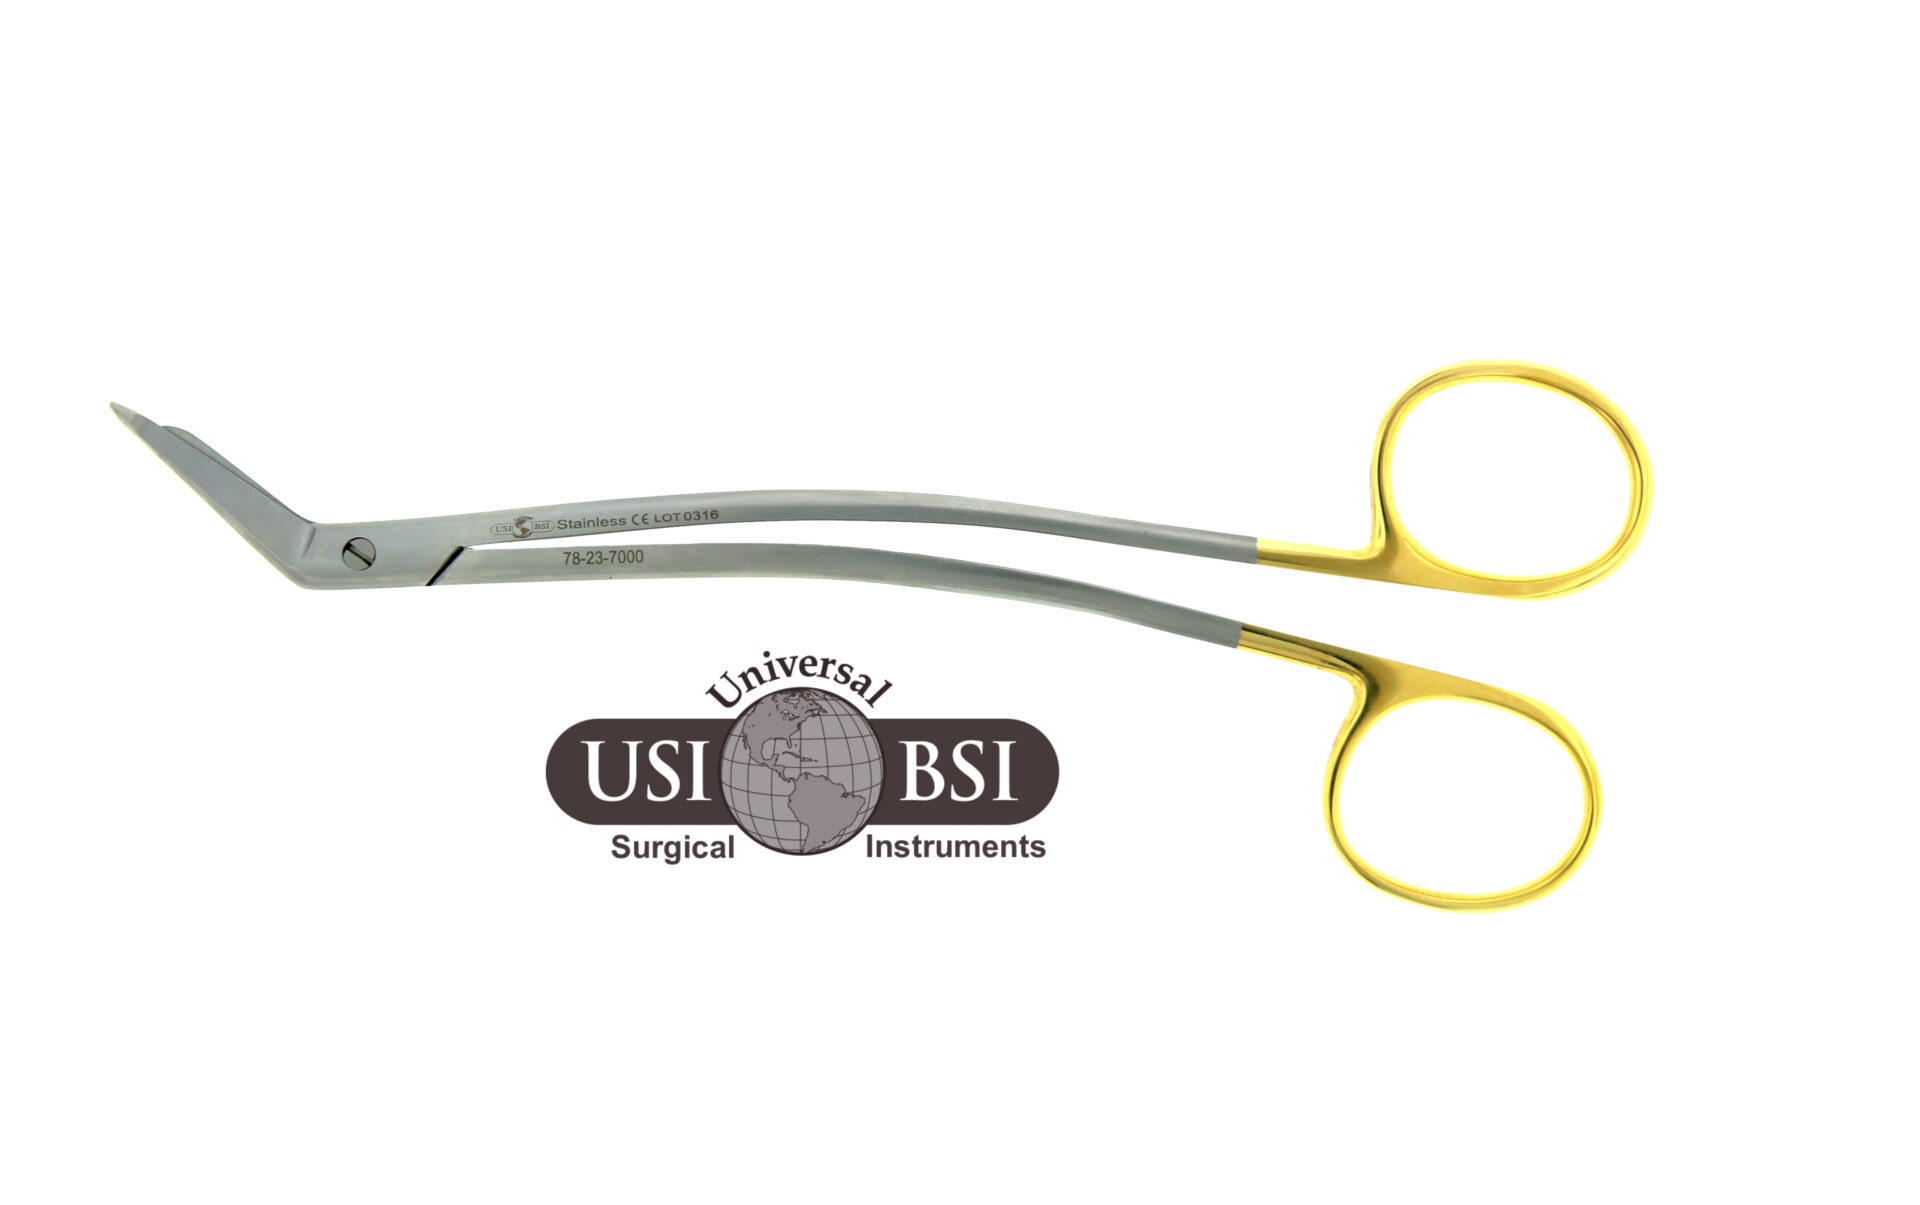 A pair of scissors with yellow handles and a logo.